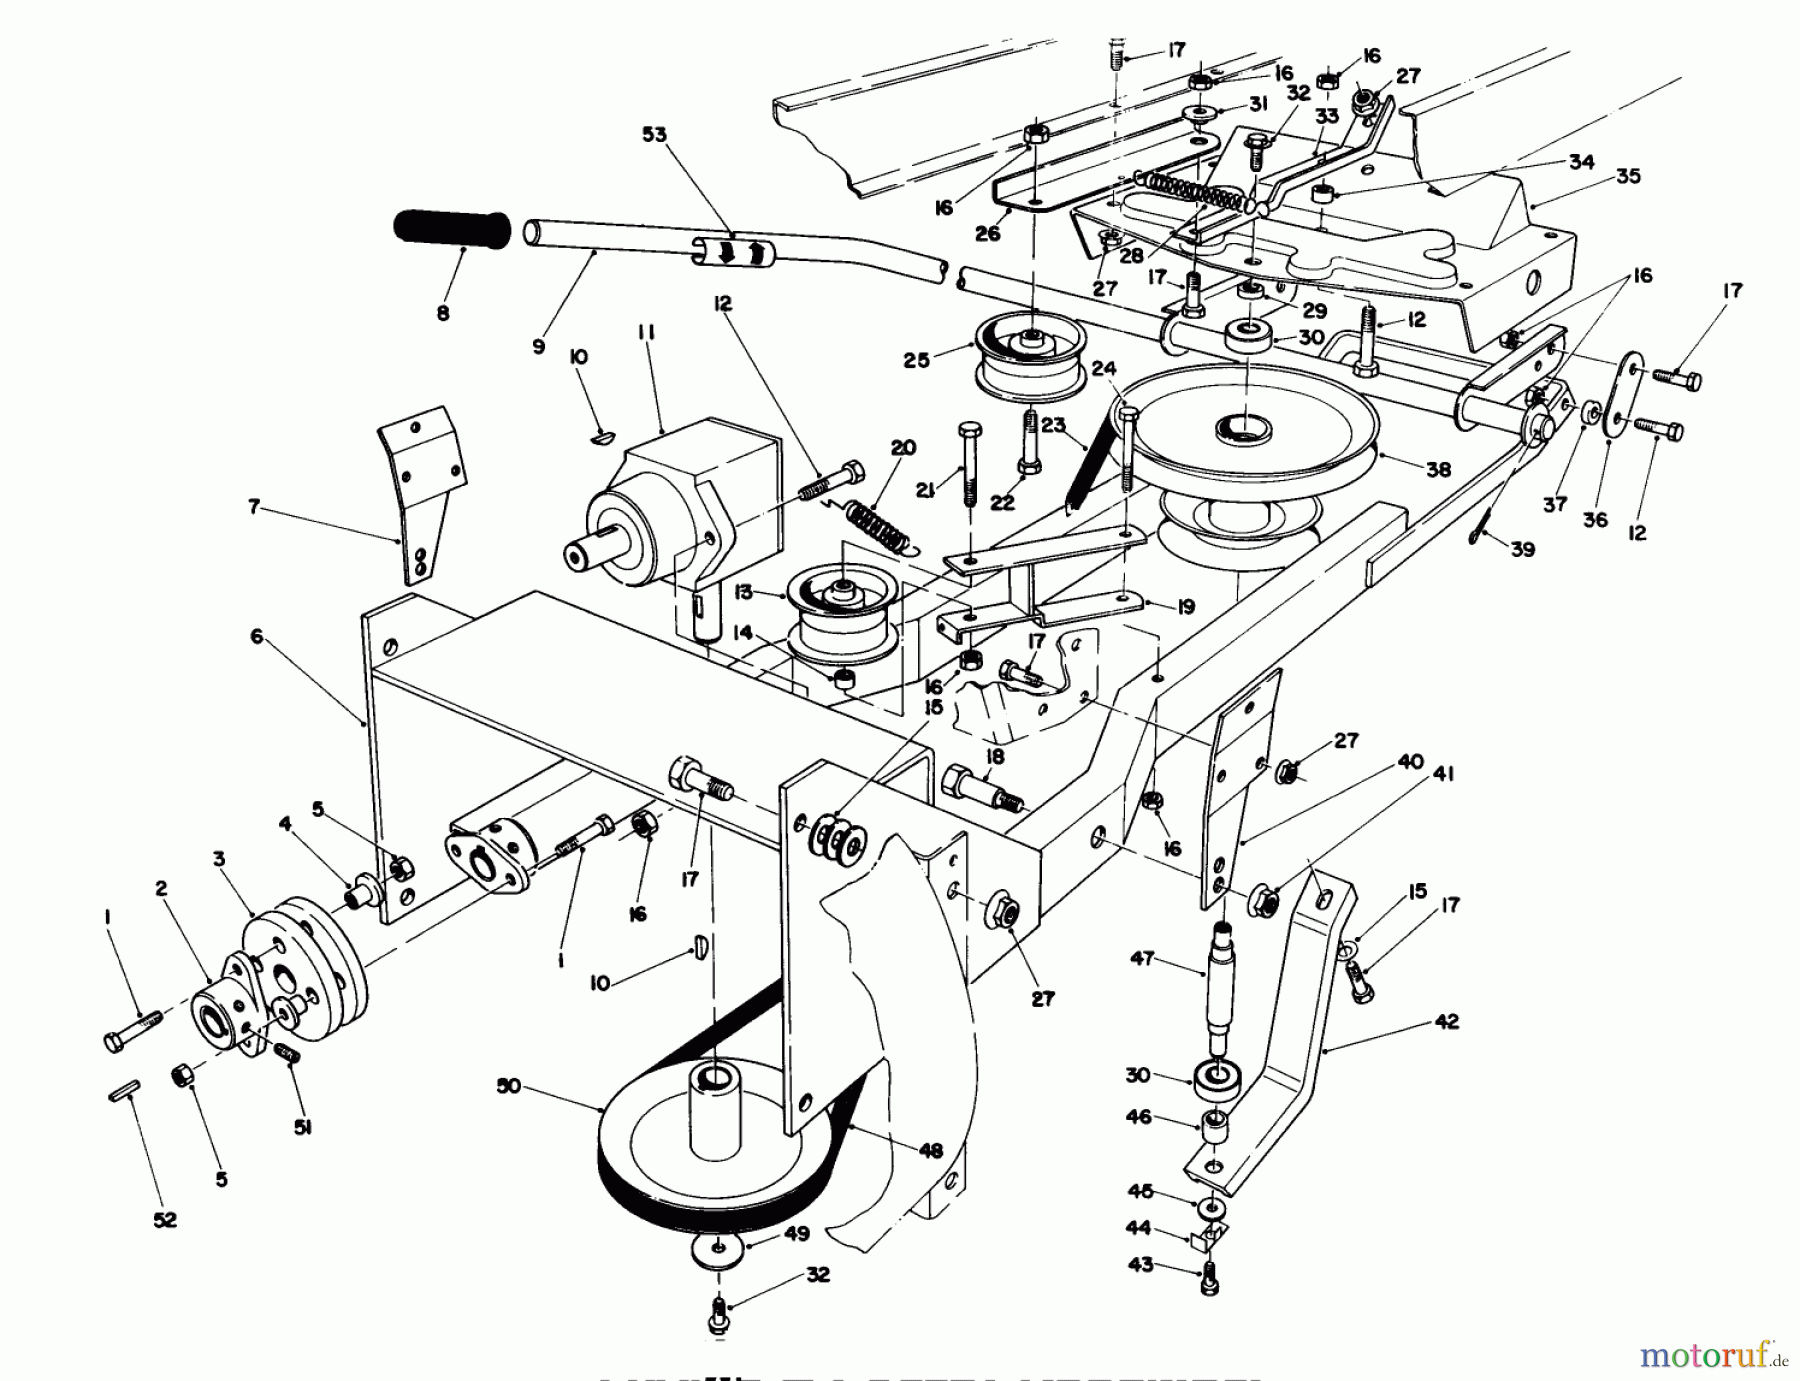  Toro Neu Mowers, Lawn & Garden Tractor Seite 1 57360 (11-32) - Toro 11-32 Lawn Tractor, 1986 (6000001-6999999) FRAME & PULLEY ASSEMBLY 36